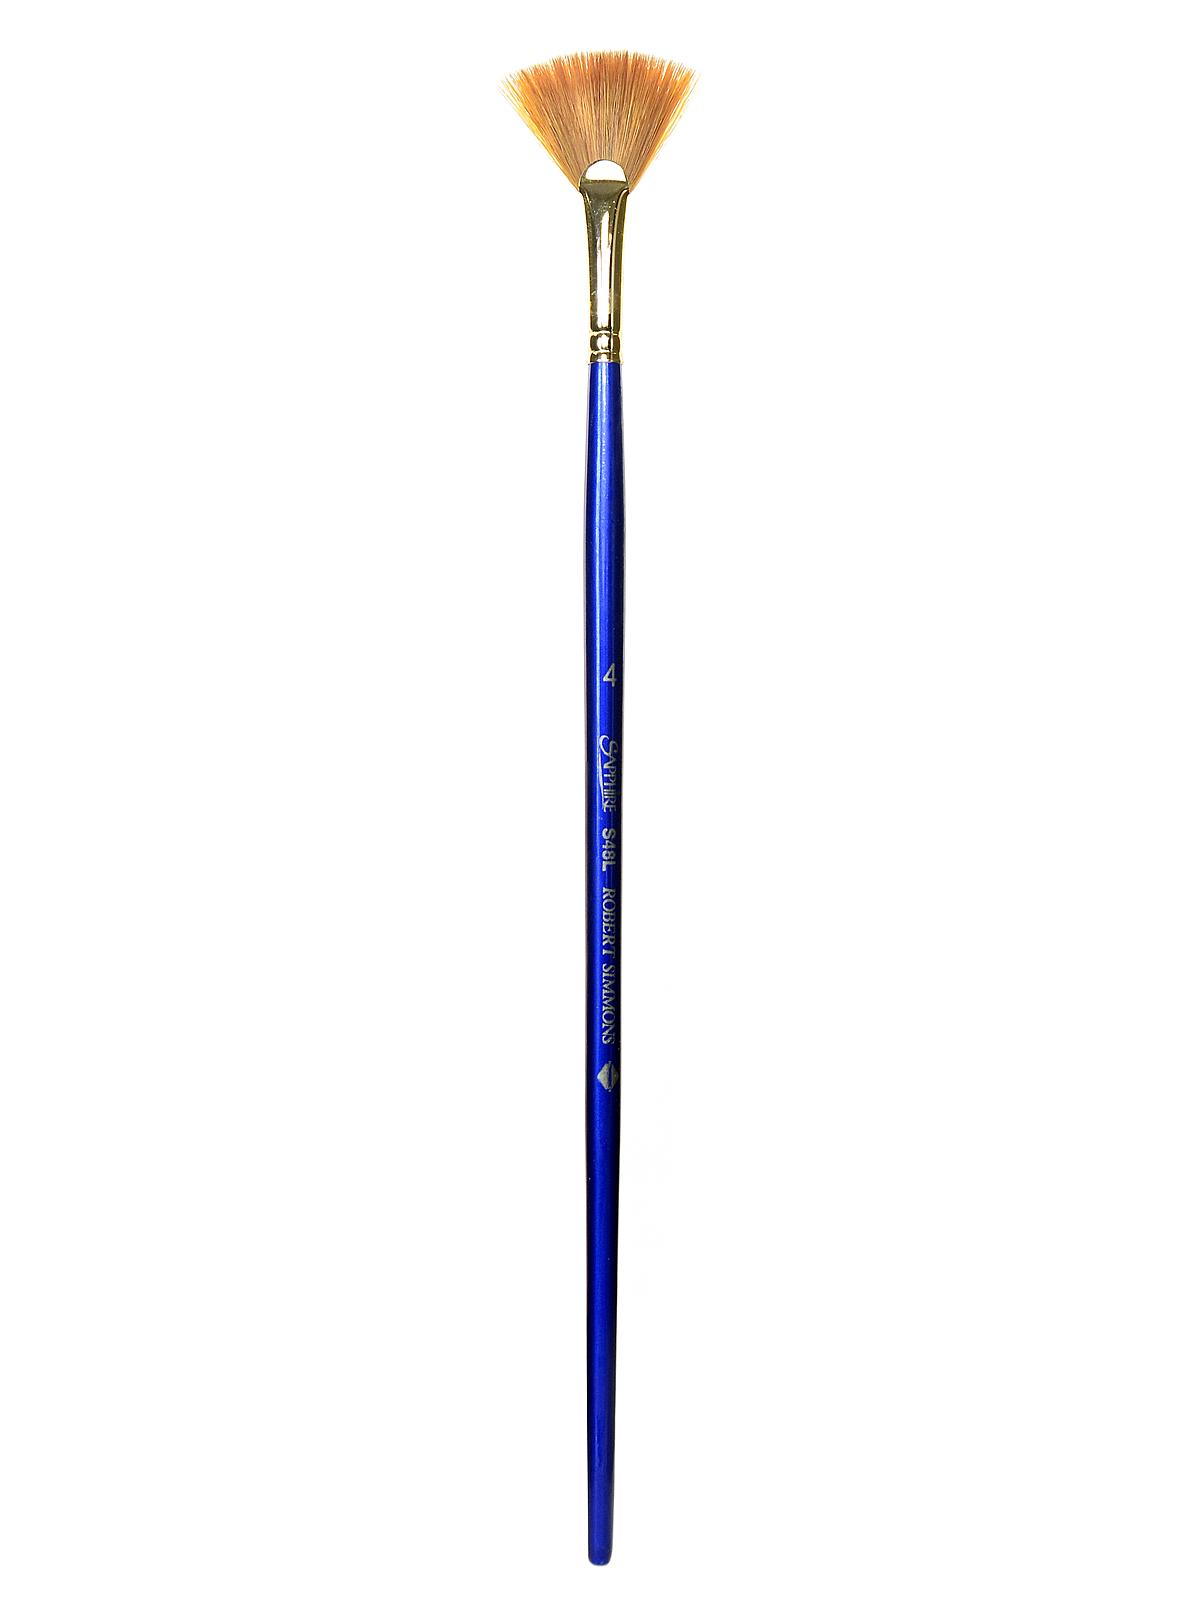 Sapphire Series Synthetic Brushes Long Handle 4 Fan